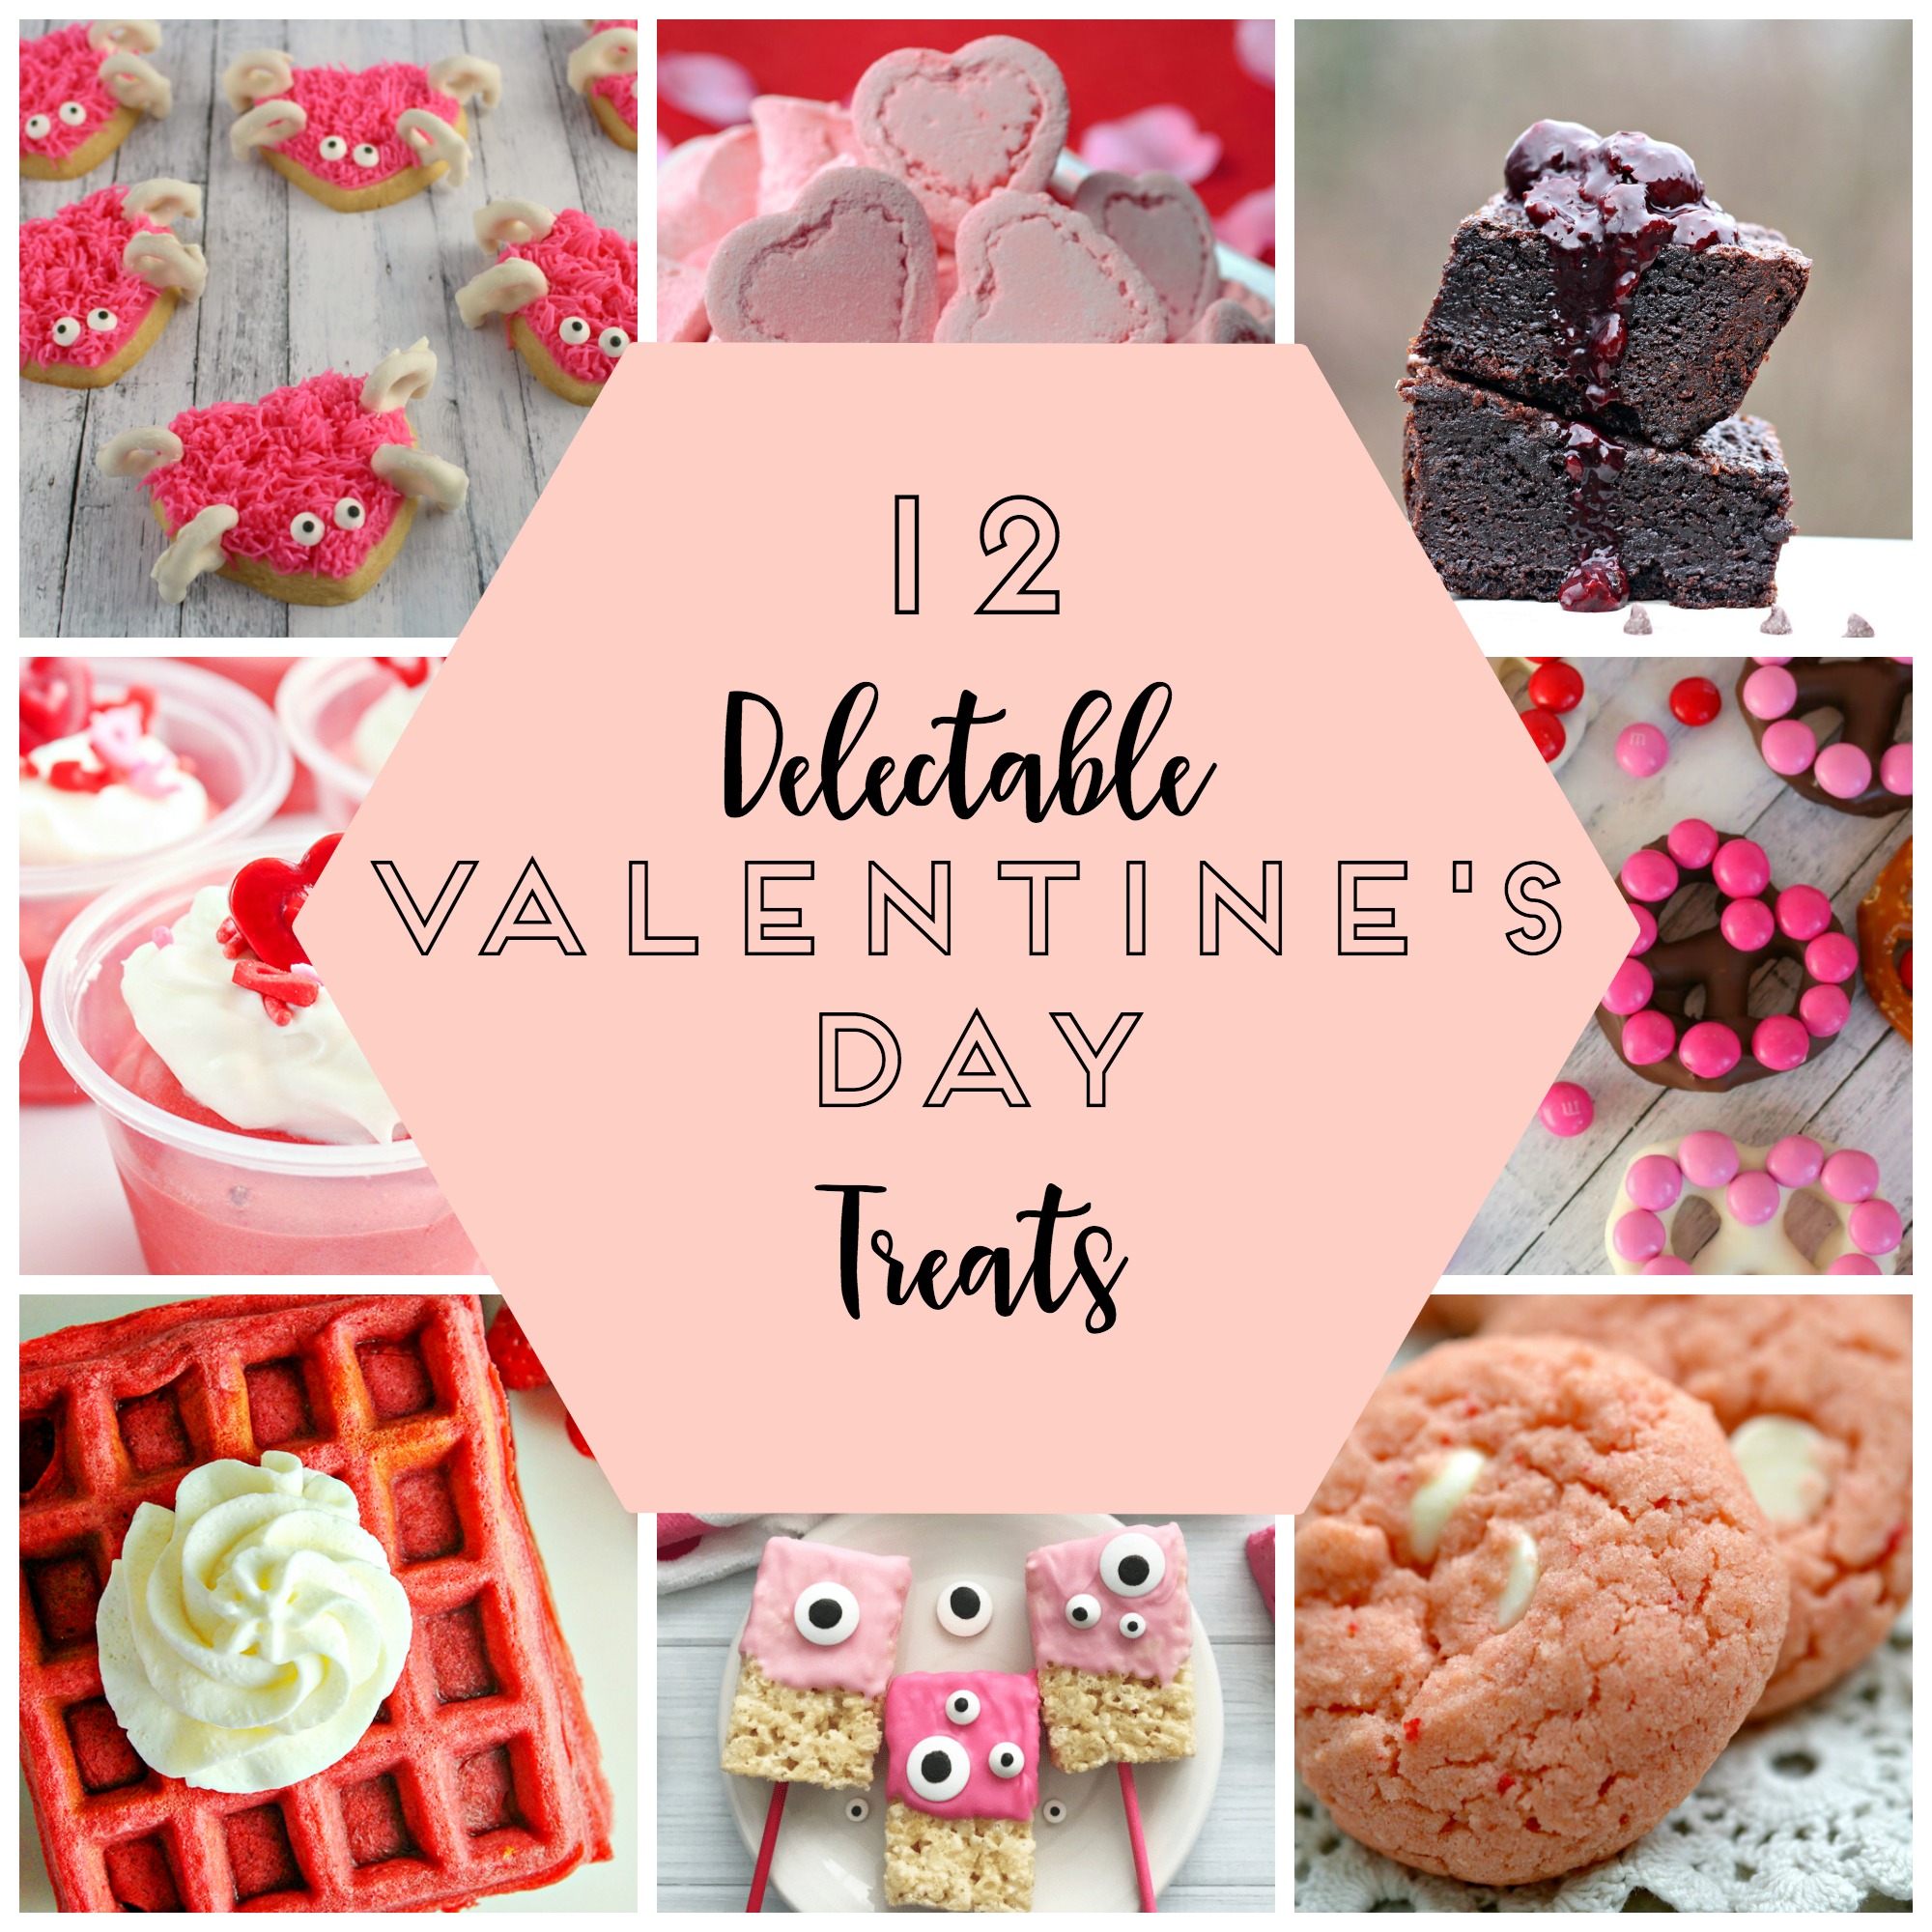 Delectable Valentine's Day Treats 